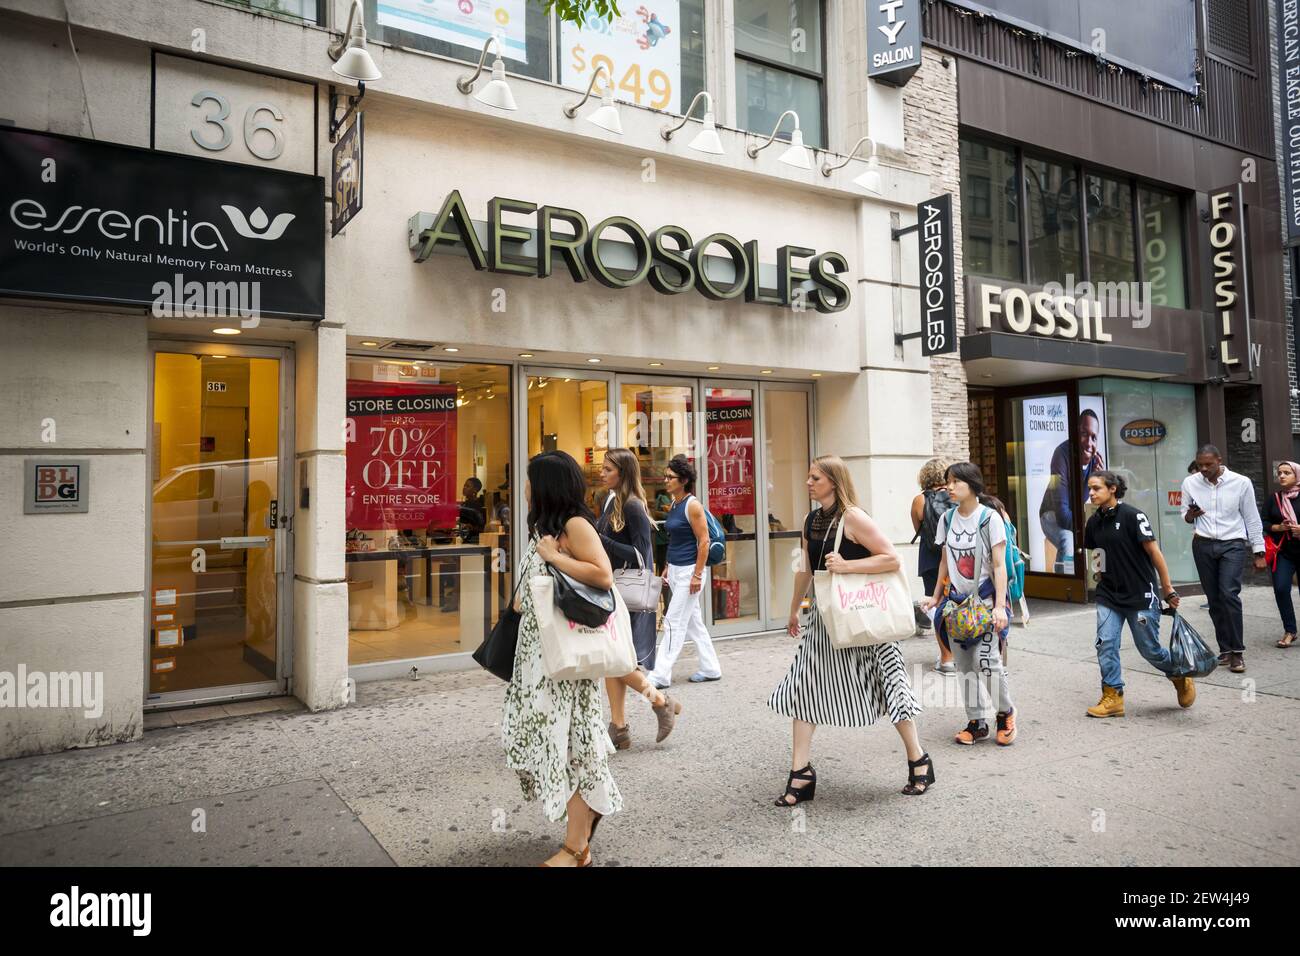 A soon to be closed Aerosoles women's footwear store in New York on Friday,  September 15, 2017. Aerosoles has filed for Chapter 11 bankruptcy  protection planning to close most stores with e-commerce,